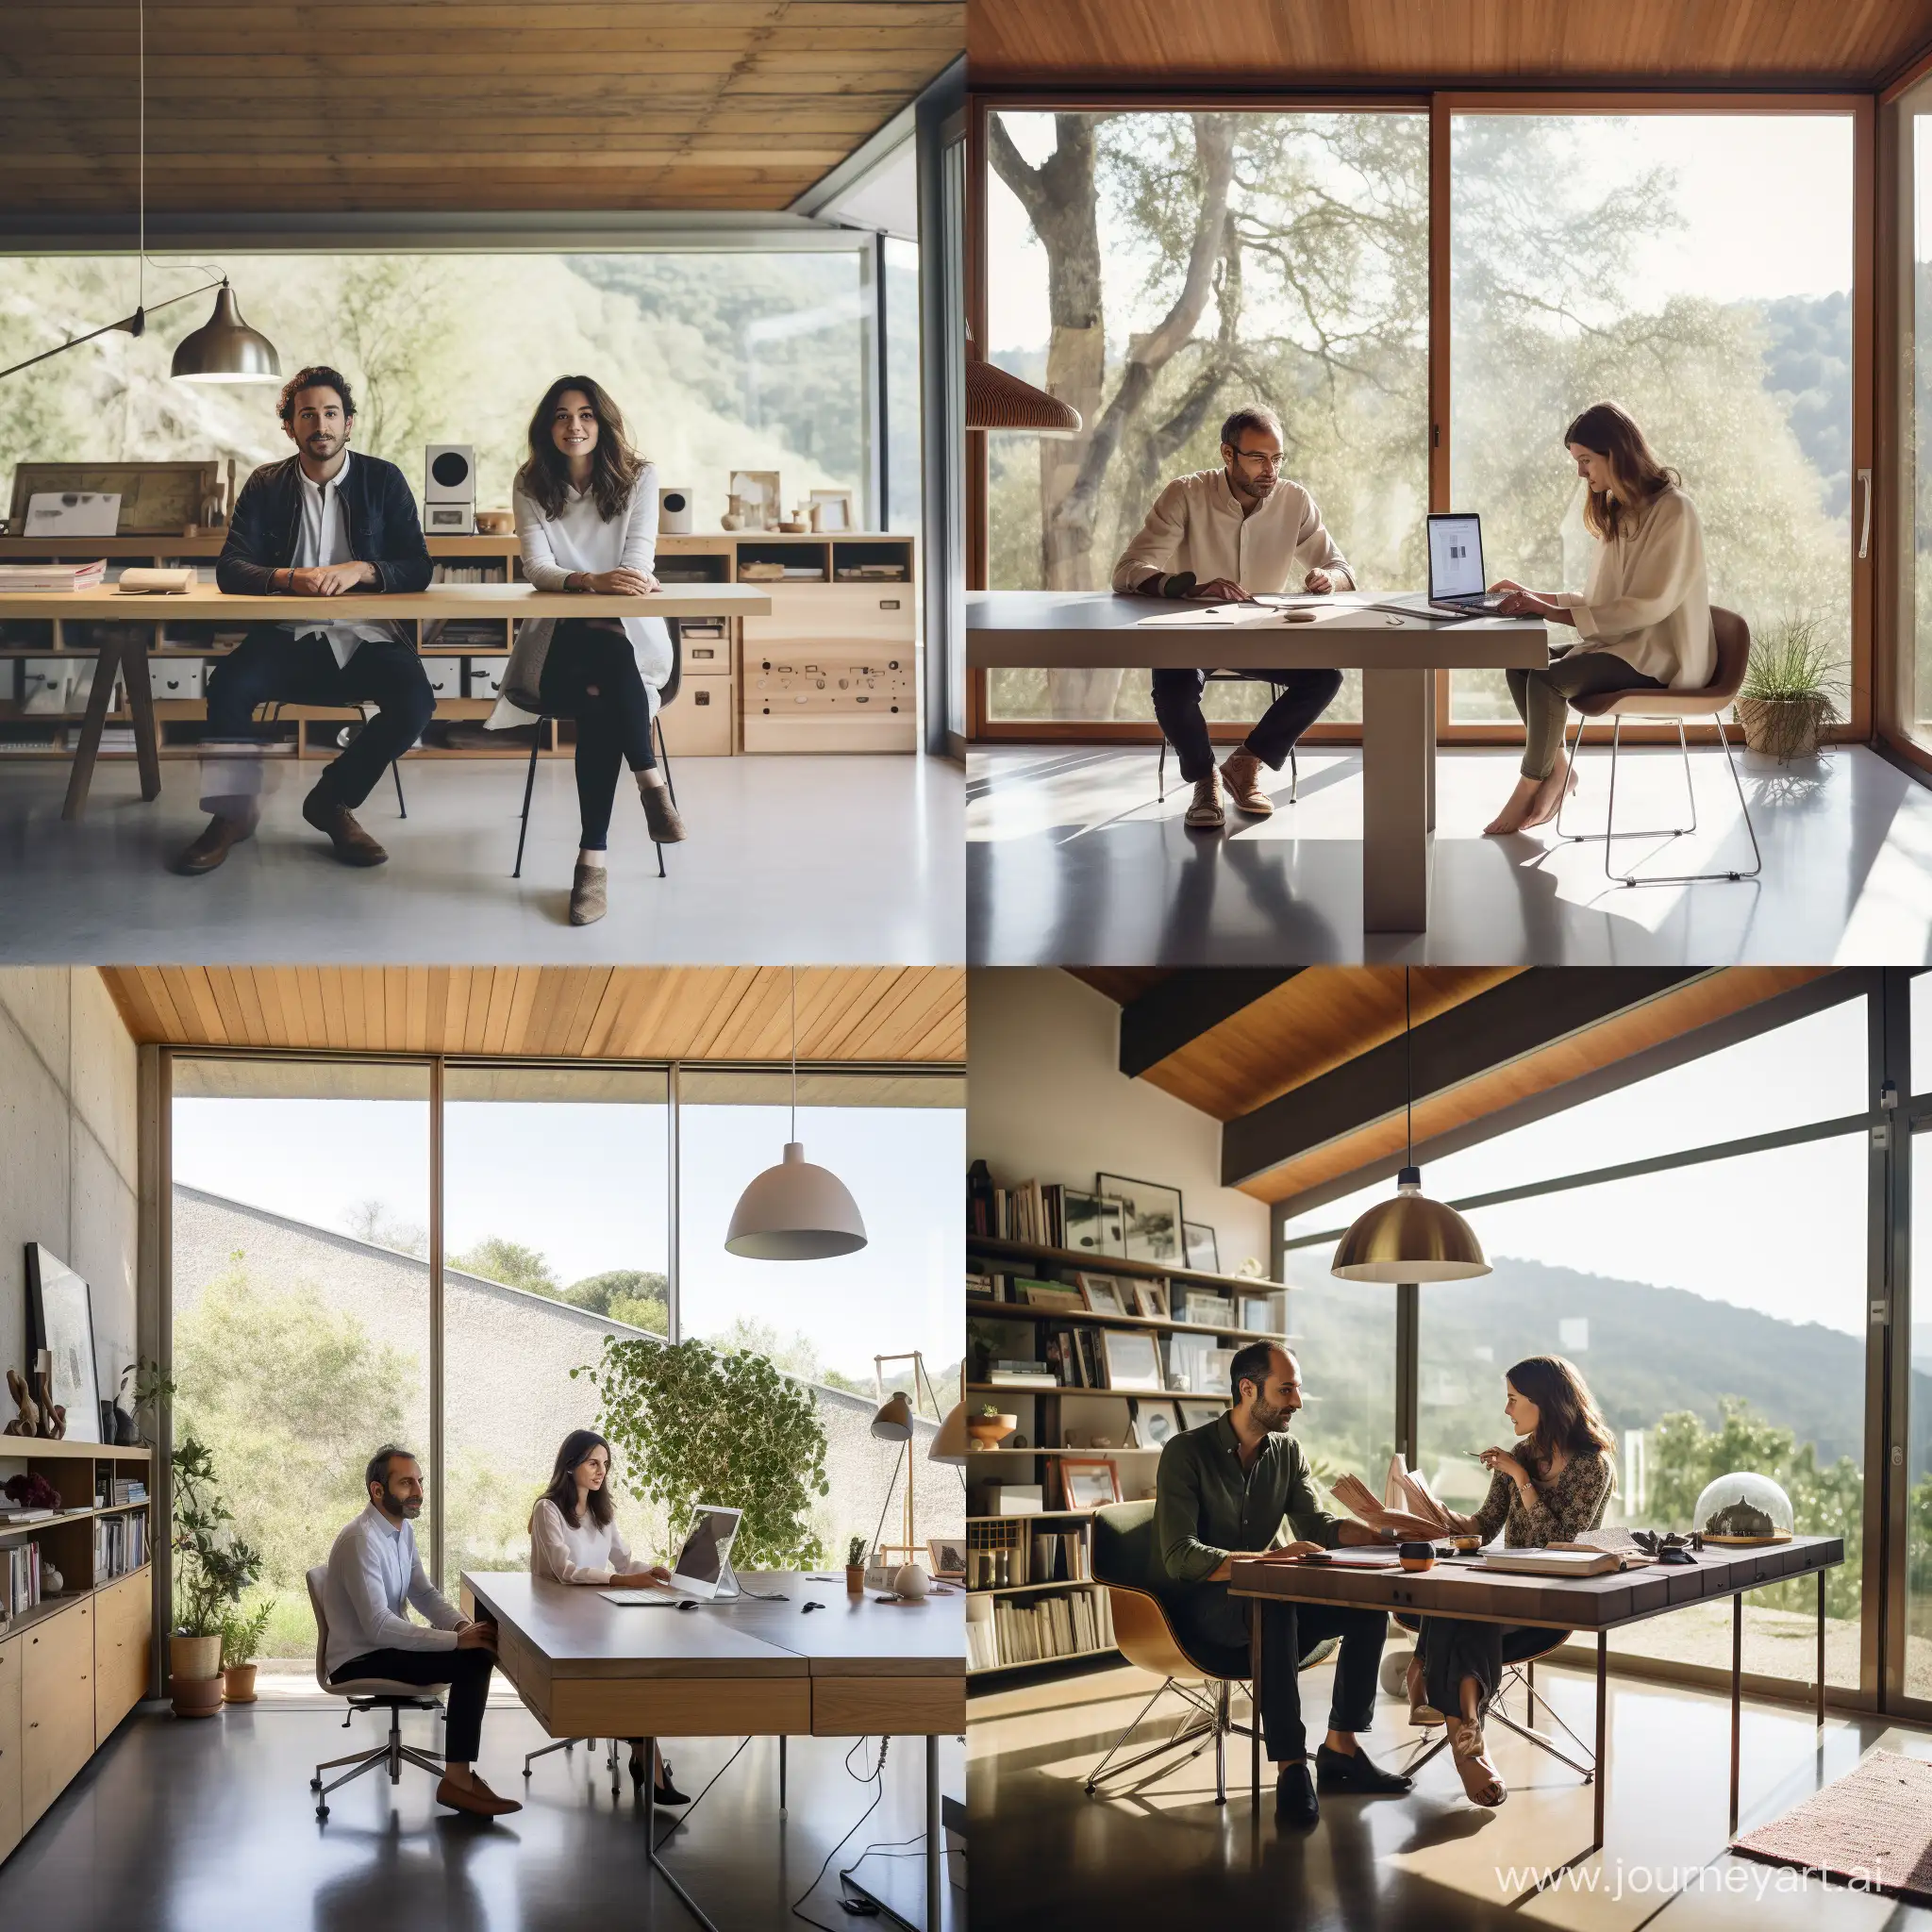 Portuguese architect couple in the office of modern countryside house